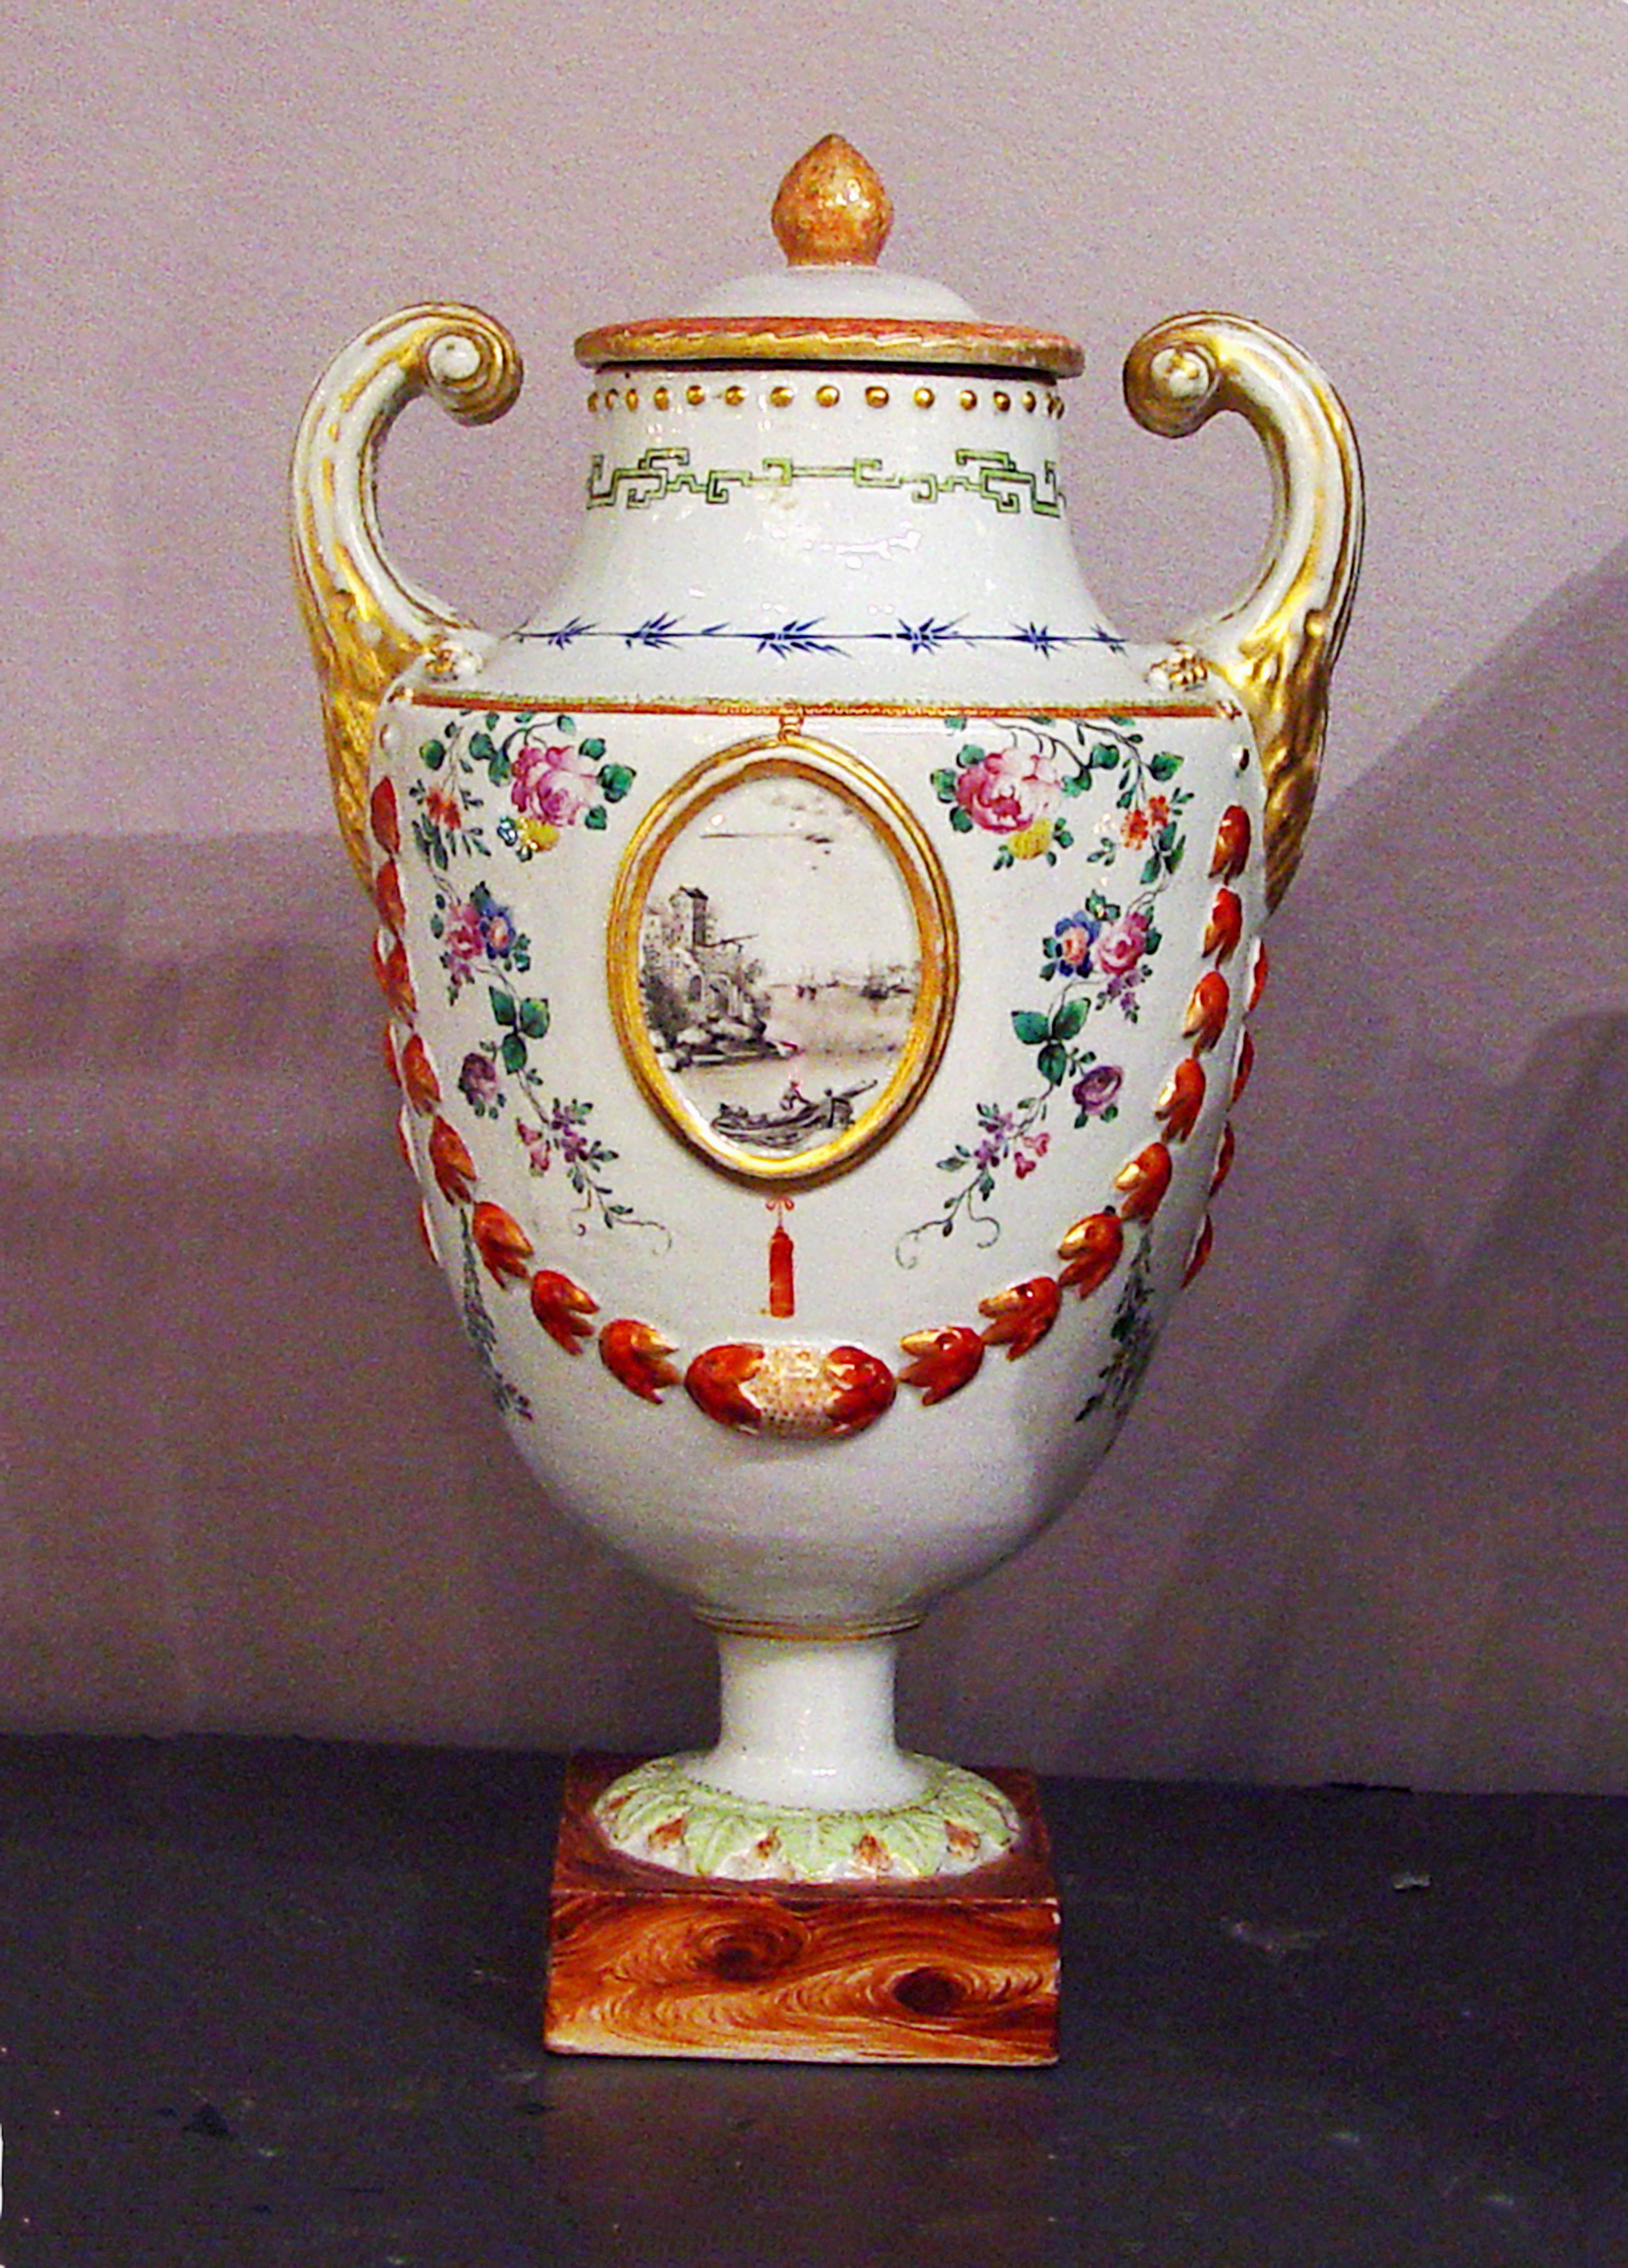 Chinese Export Porcelain Pistol-Handled Vase and Cover, 
Circa 1770.

This Chinese Export double-pistol-handled porcelain shape can be traced back to silver prototypes by Stefano della Bella (1610-1664) and became particularly popular in both silver